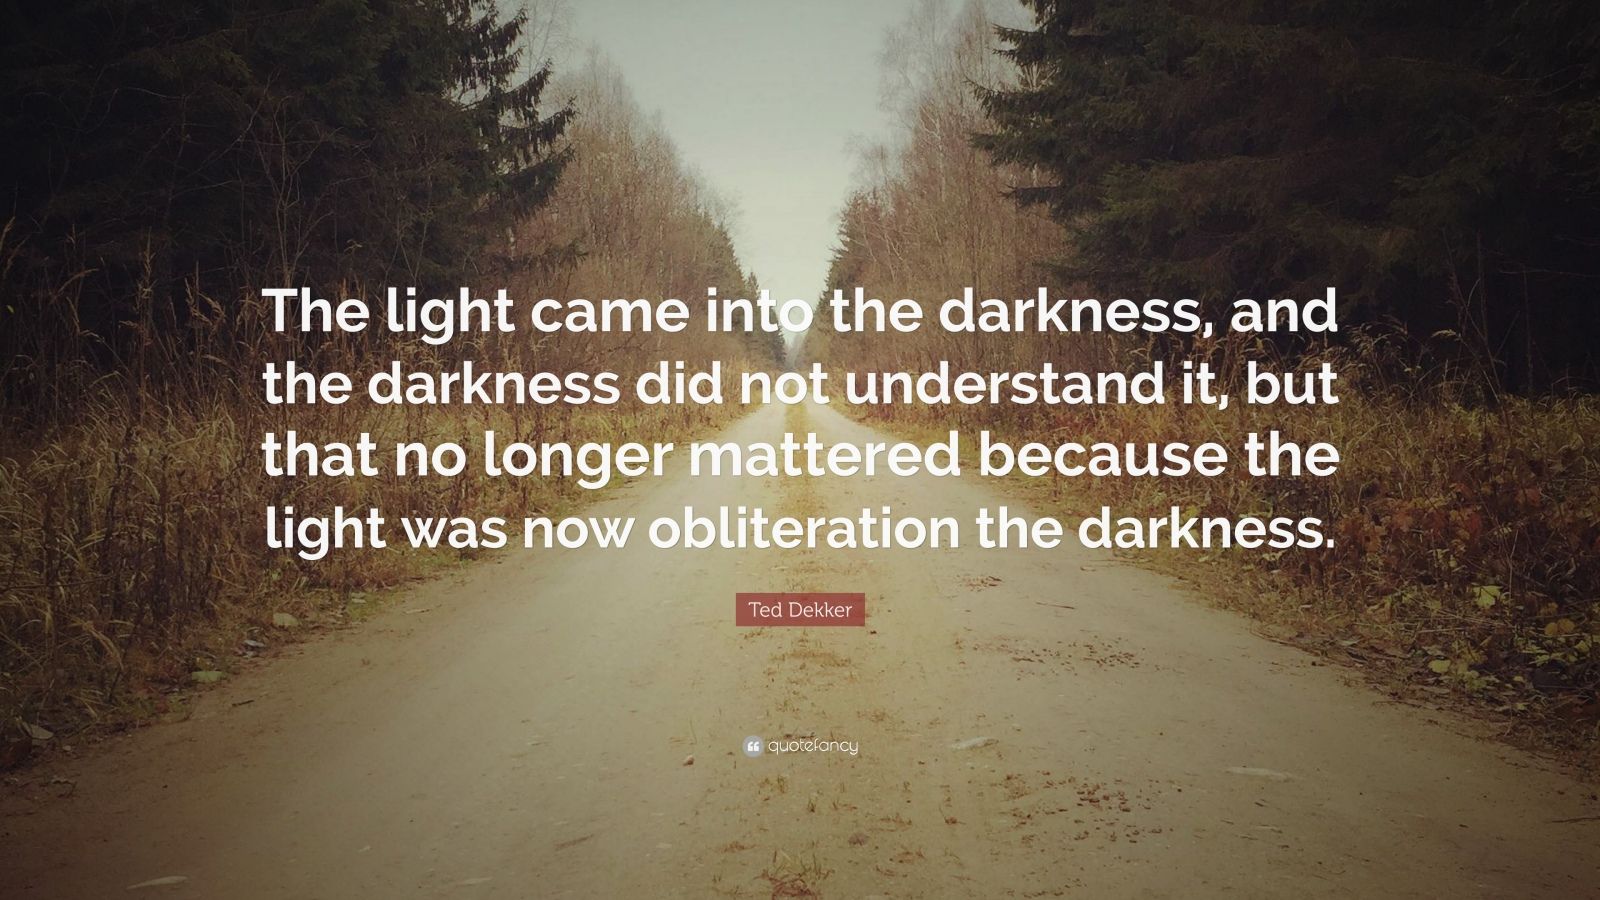 Ted Dekker Quote: “The light came into the darkness, and the darkness